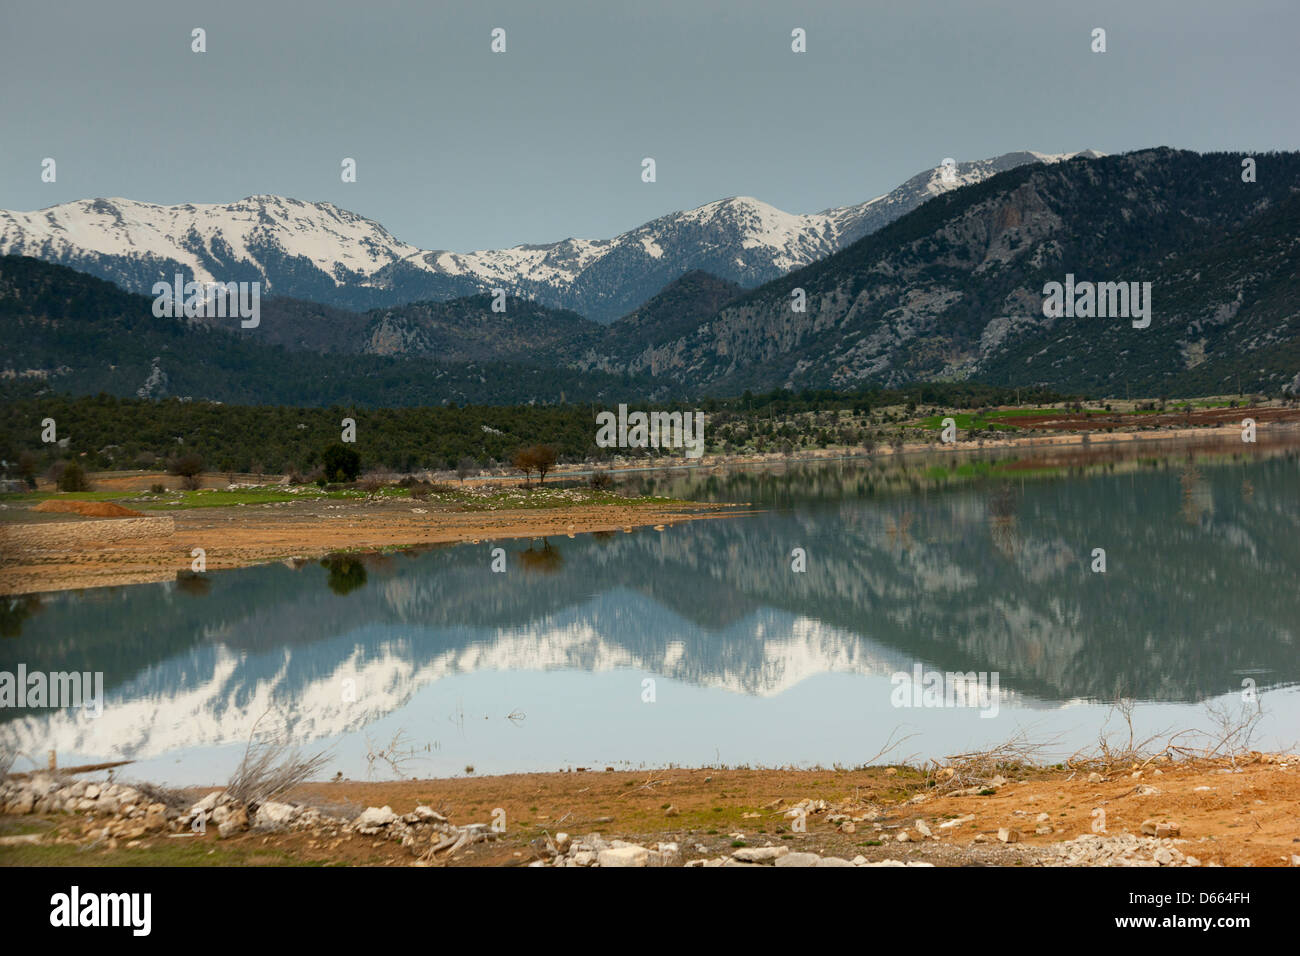 Mountains reflected in a lake on the D350 road between Ankara and Fethiye Stock Photo